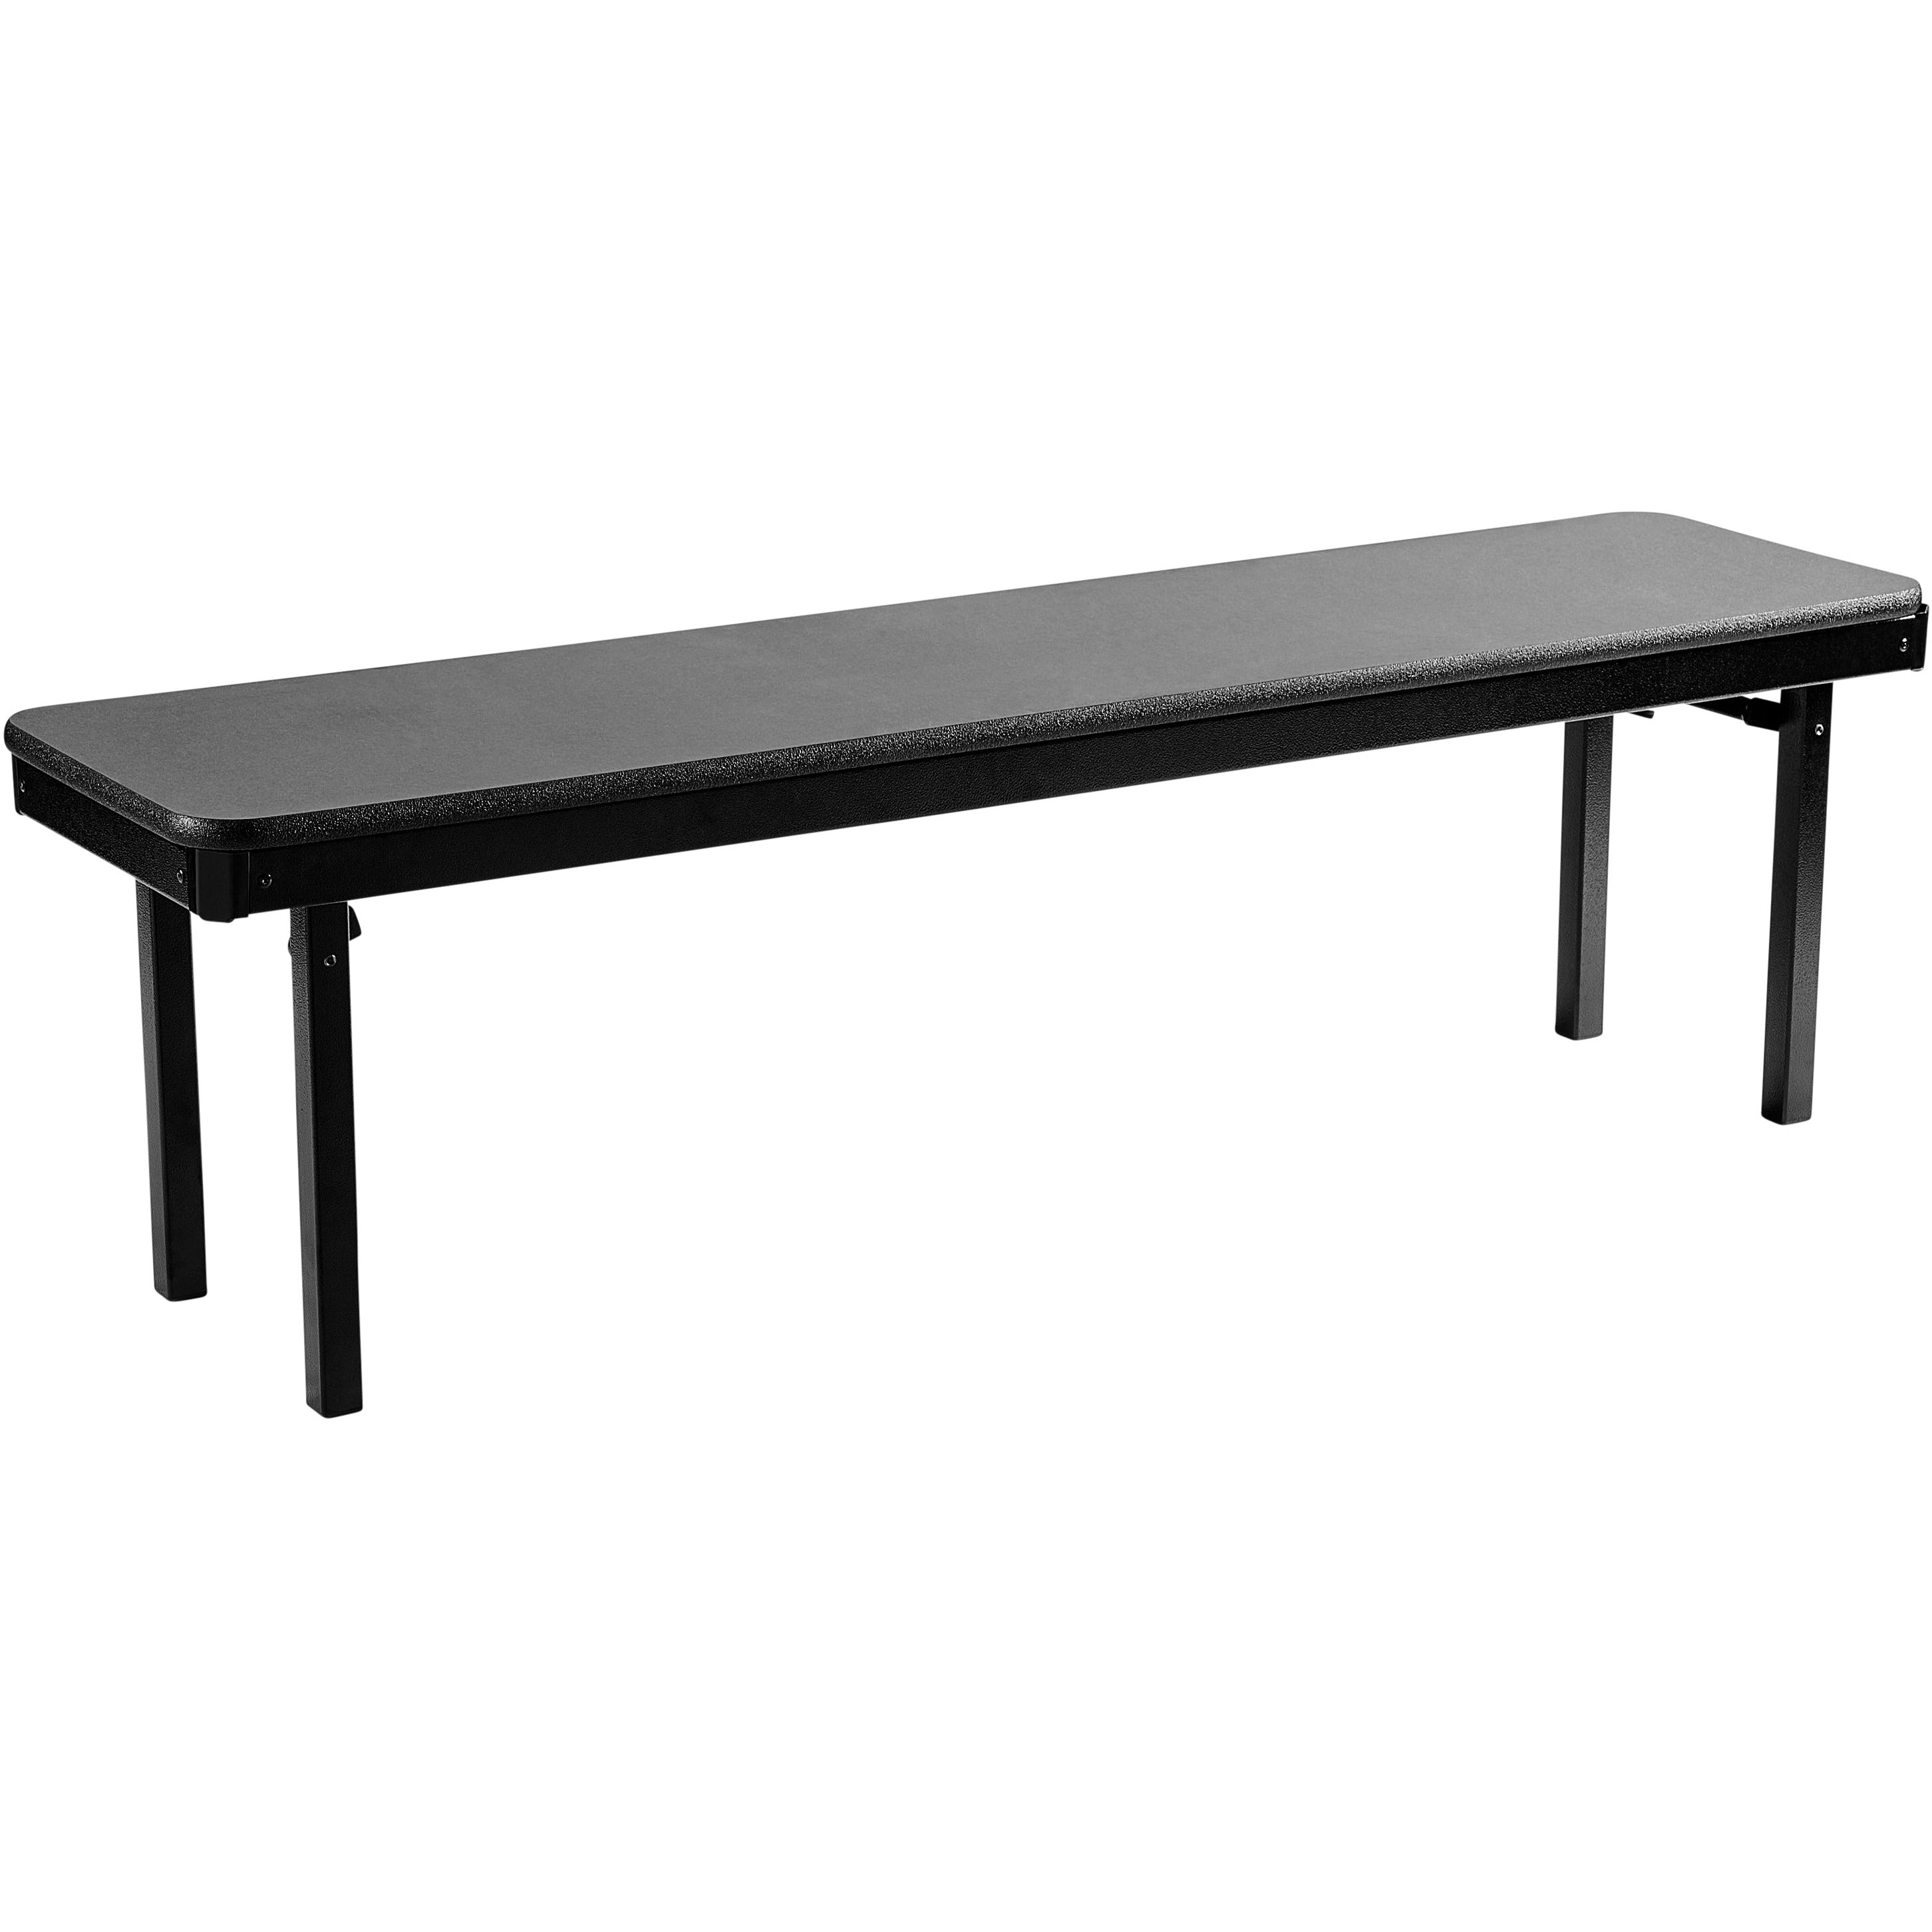 Folding Bench - MSFB Series - 15" x 96" - MDF with ProtectEdge - Gray Nebula